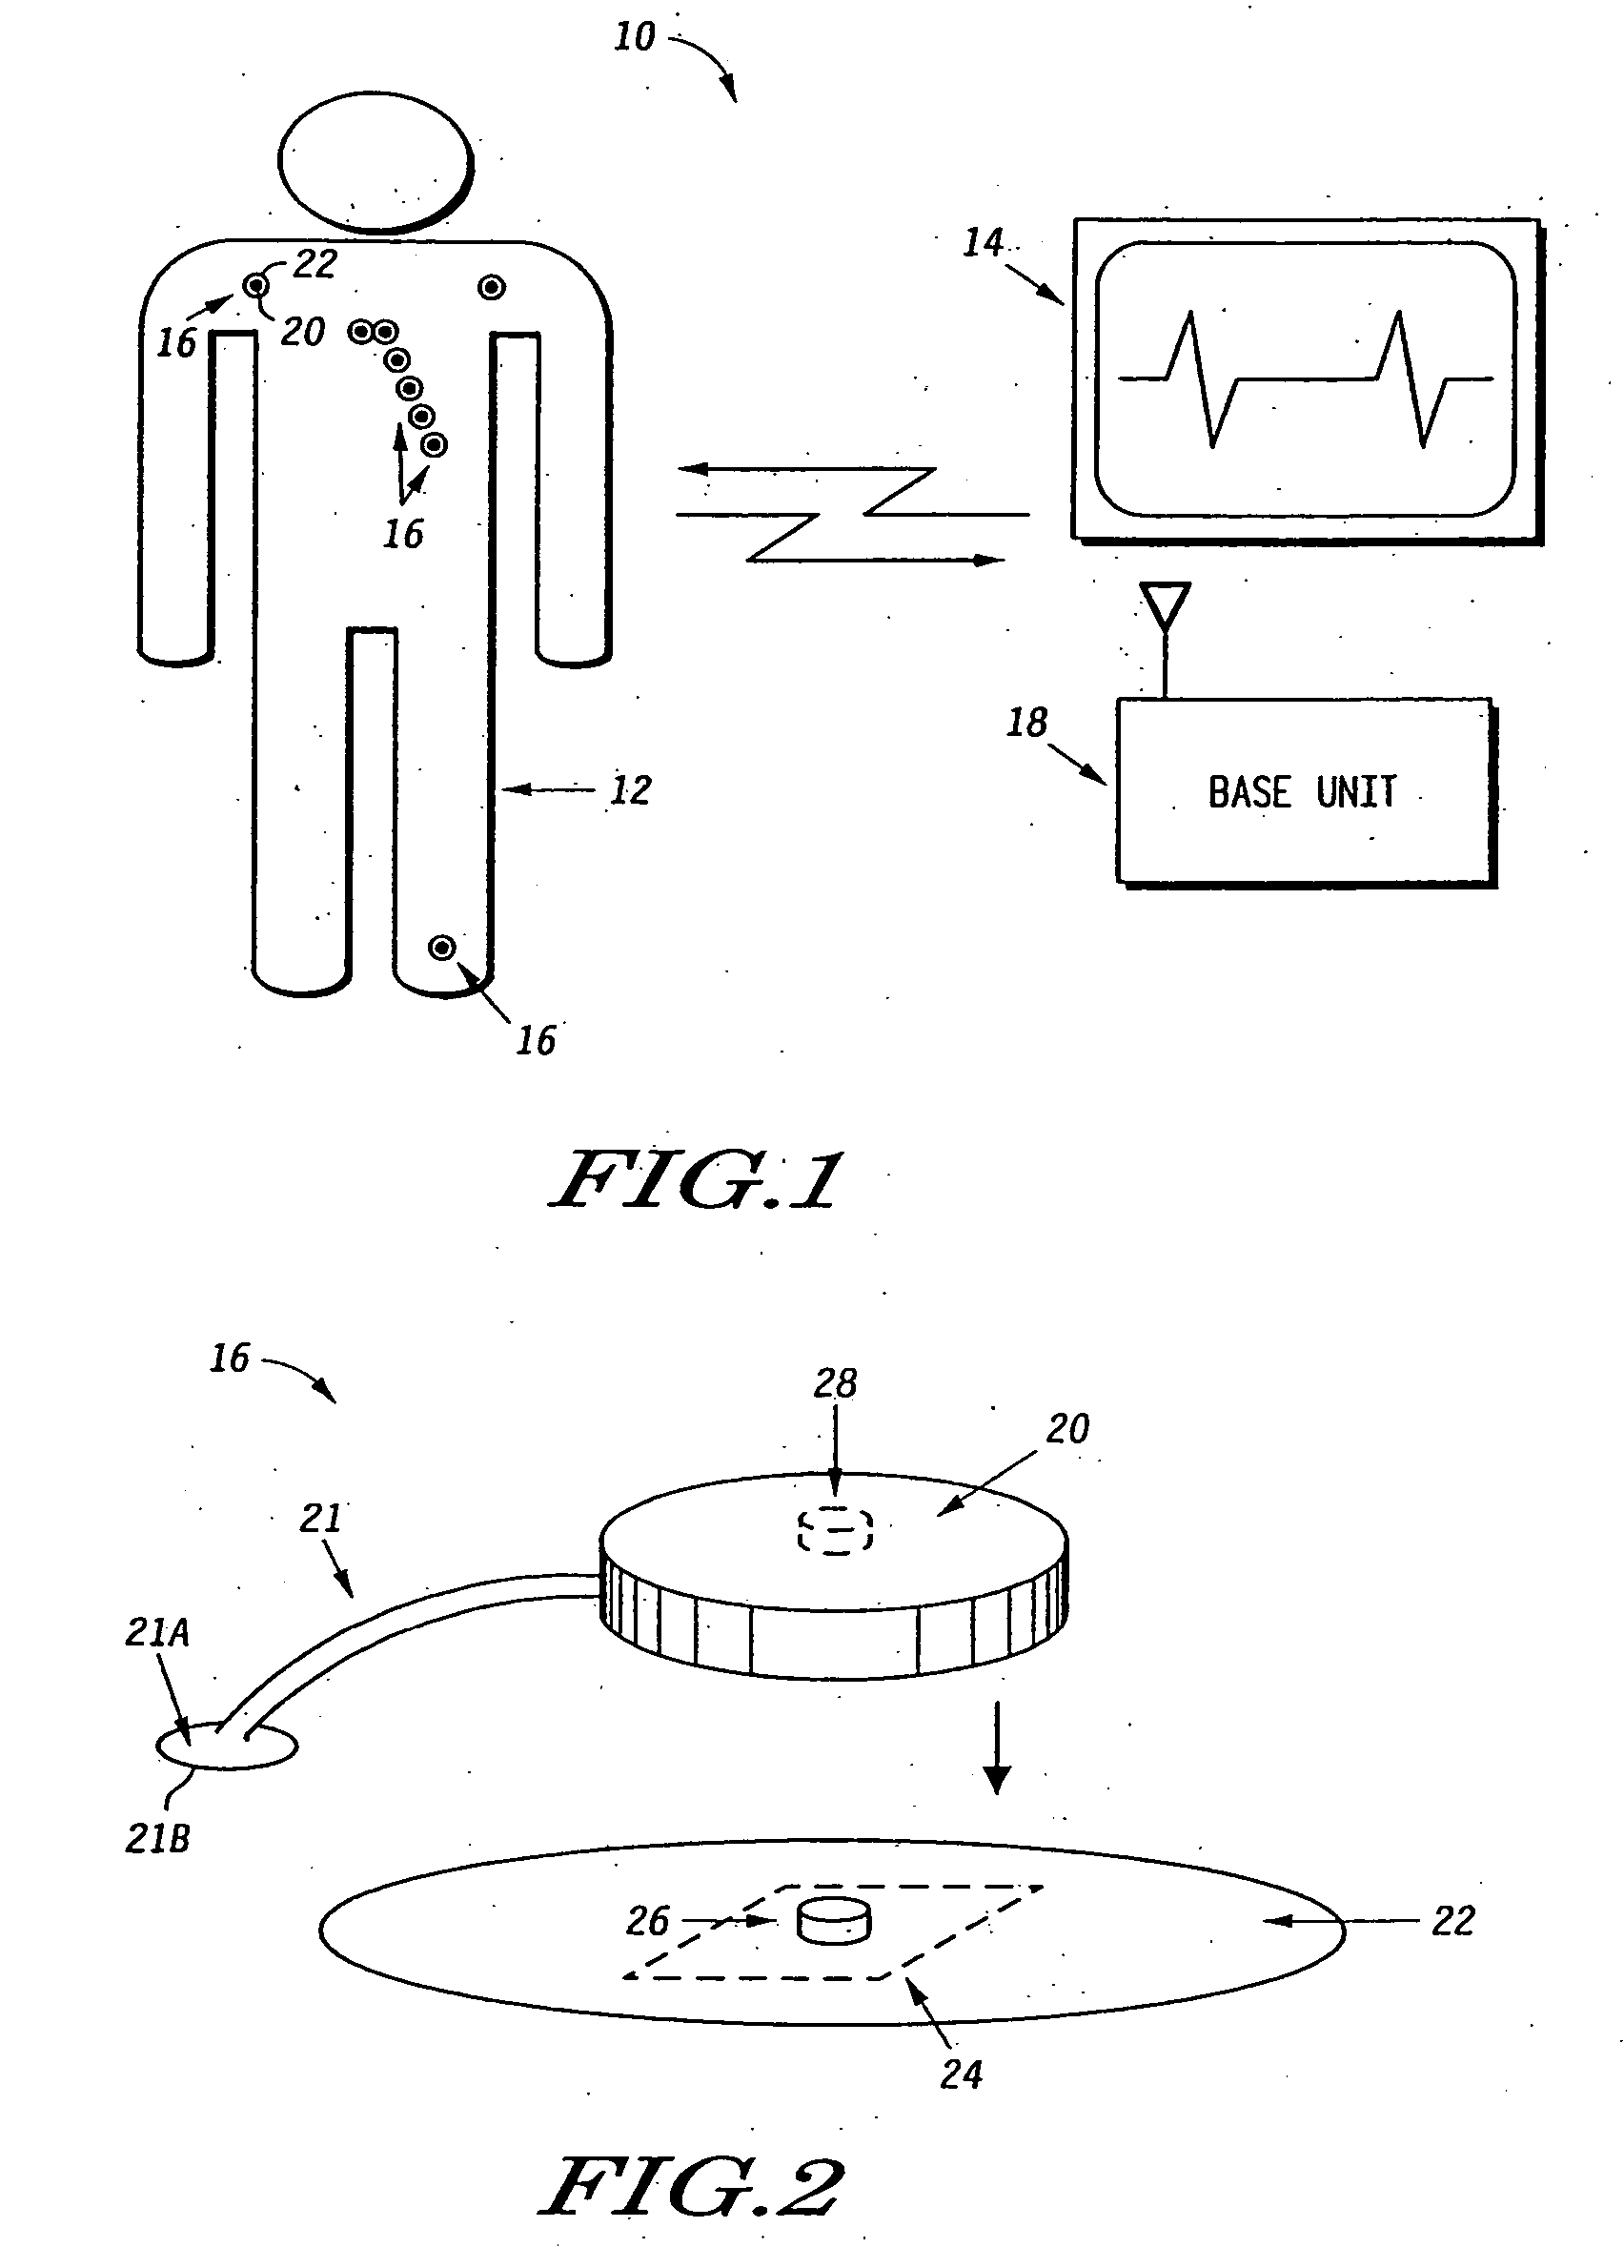 Programmable wireless electrode system for medical monitoring